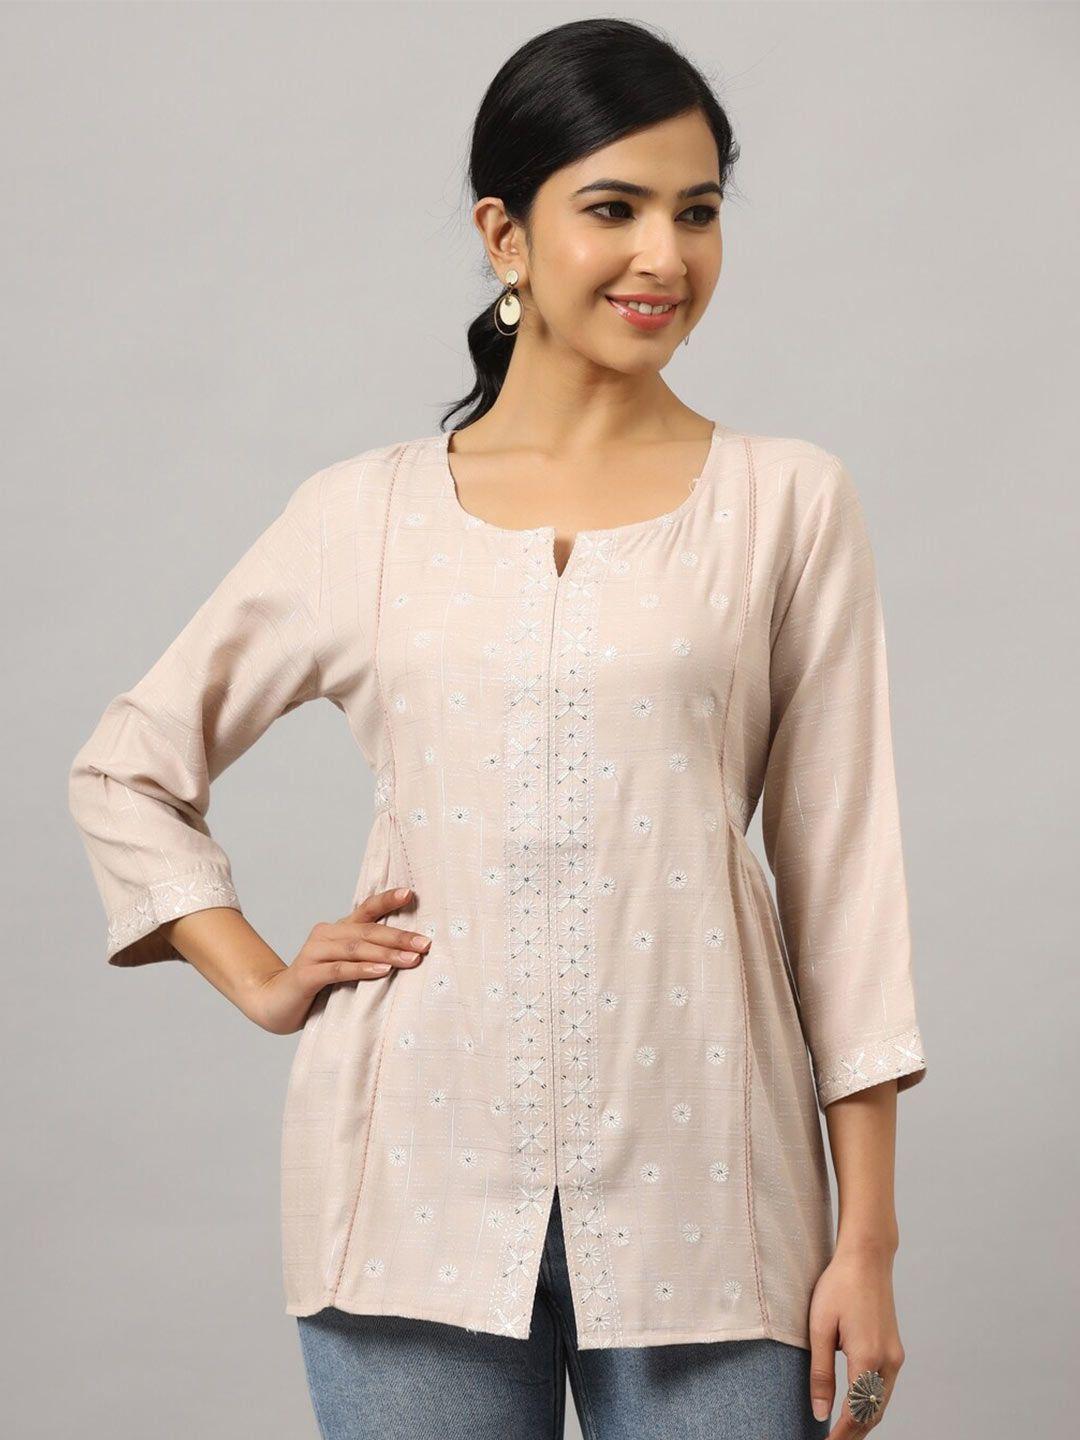 amchoor floral embroidered casual top